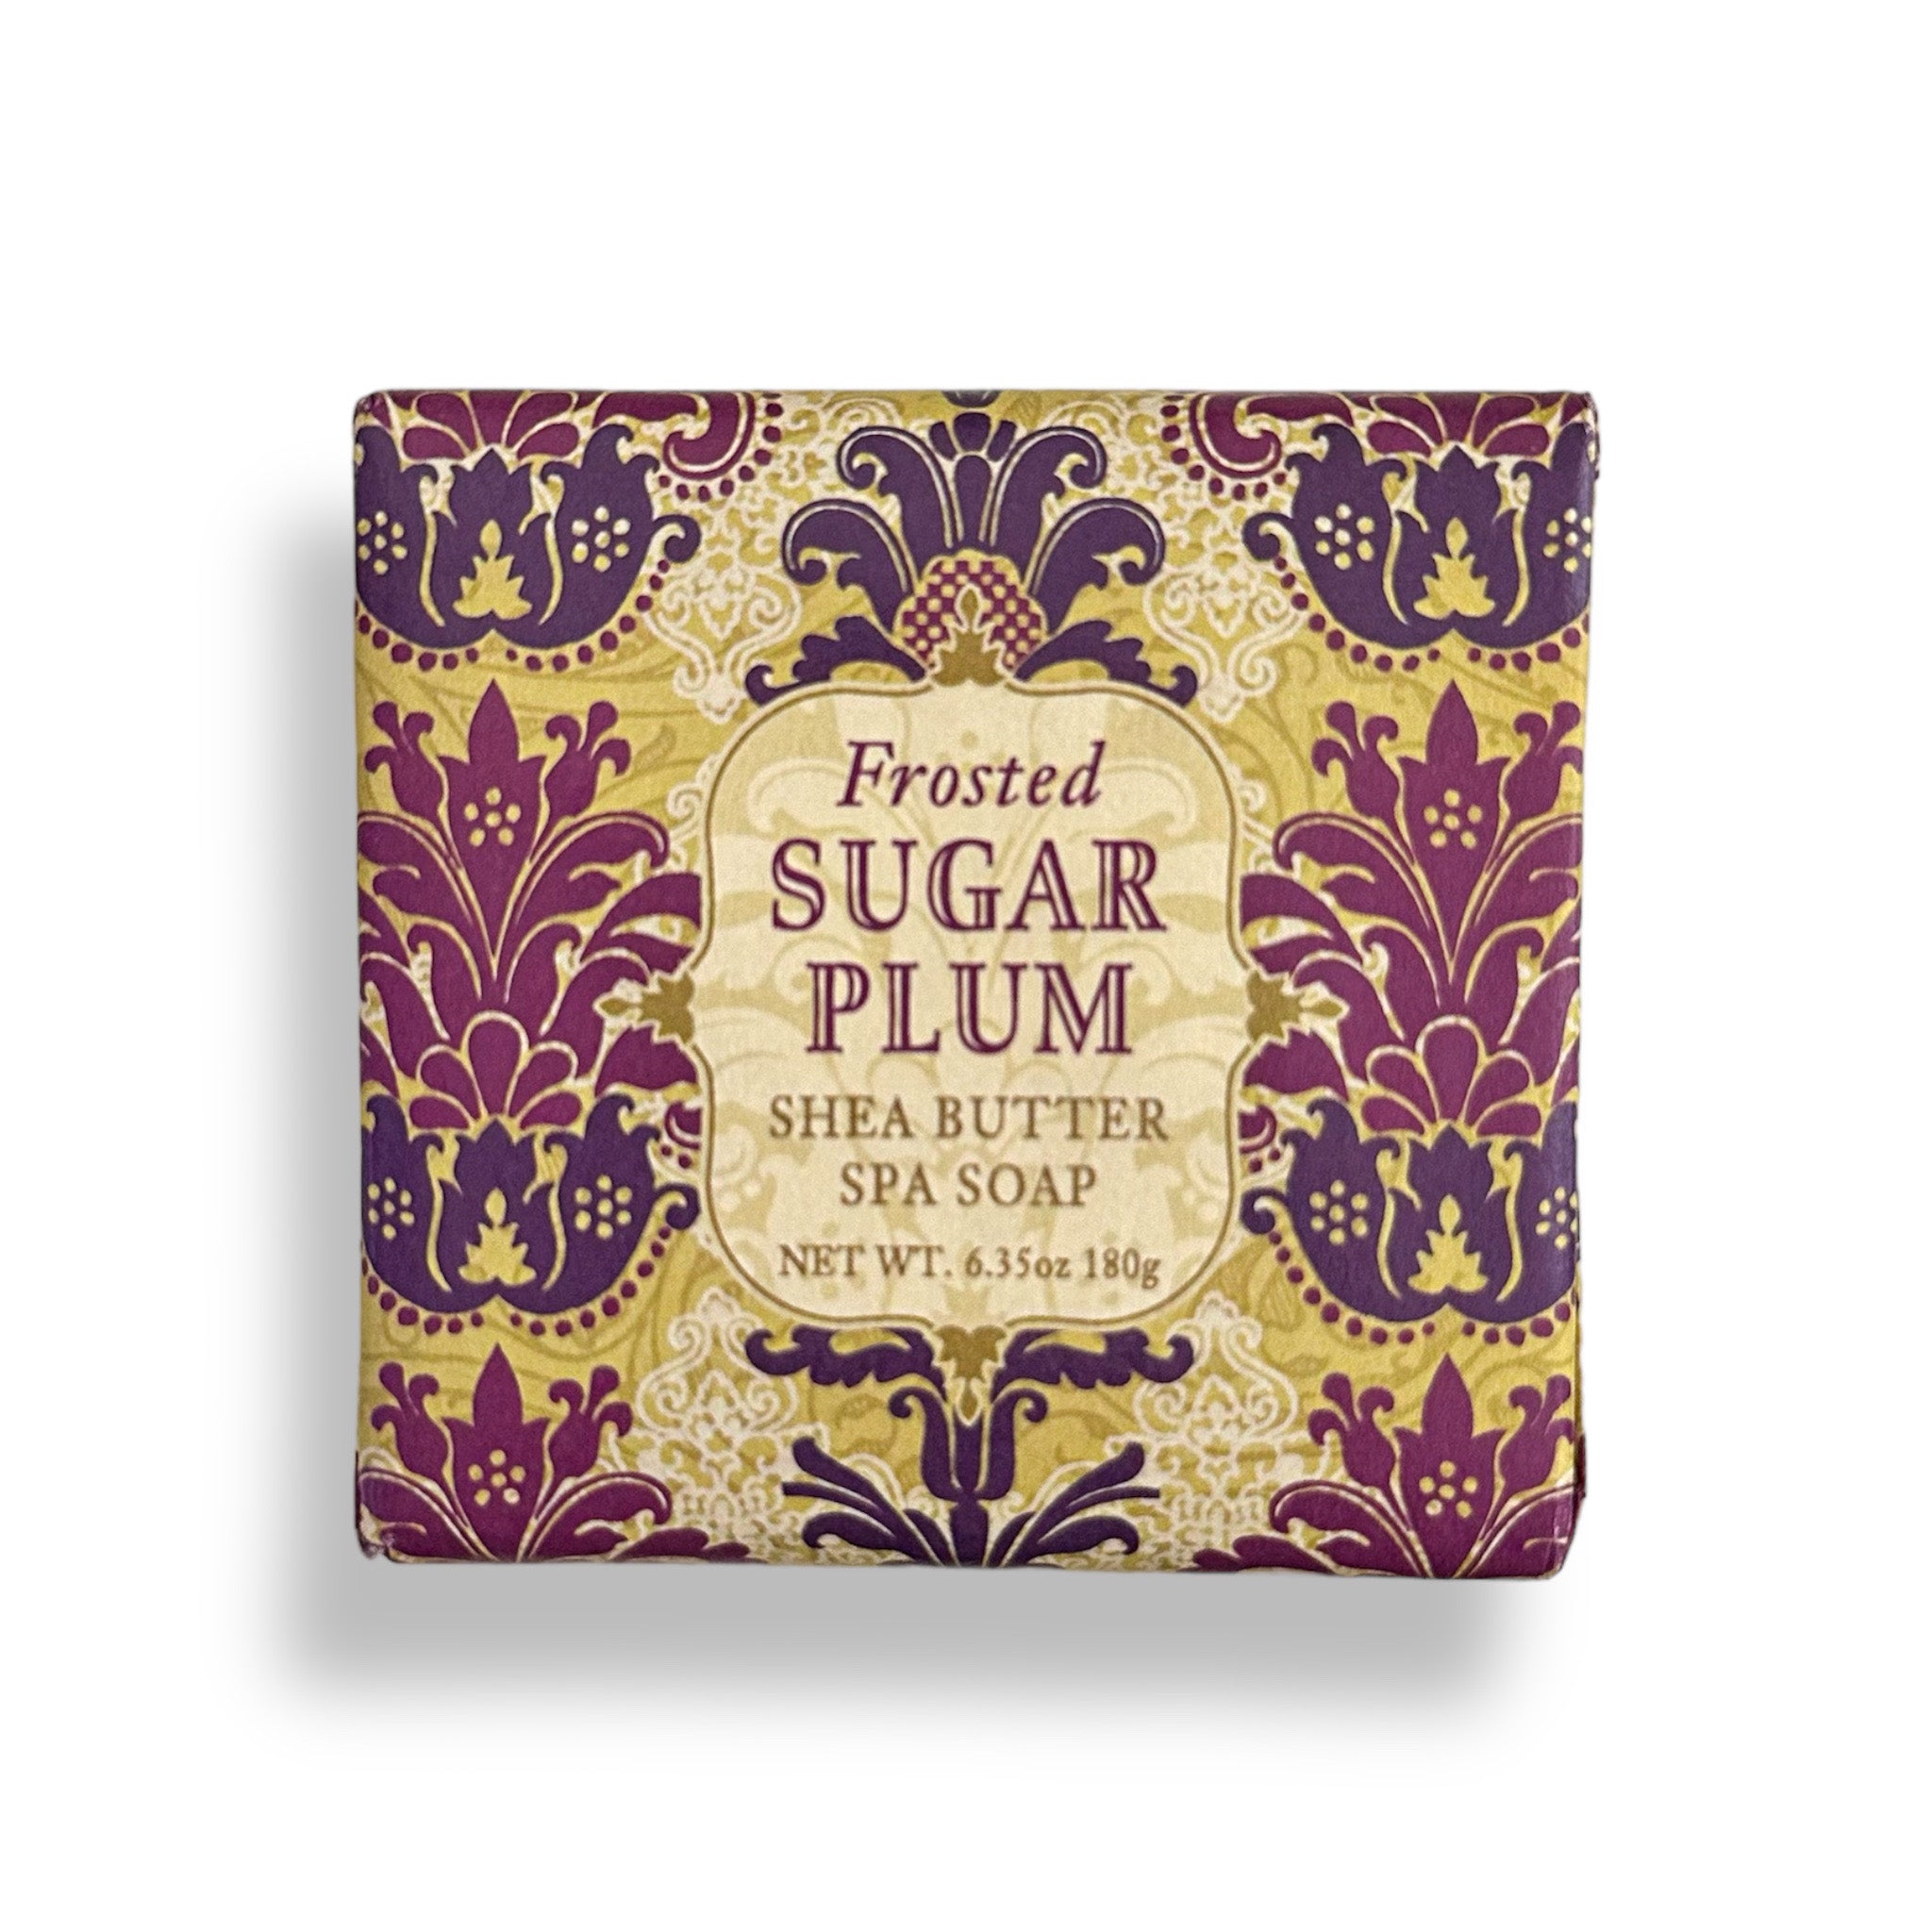 Greenwich Bay Trading Company Frosted Sugar Plum Soap